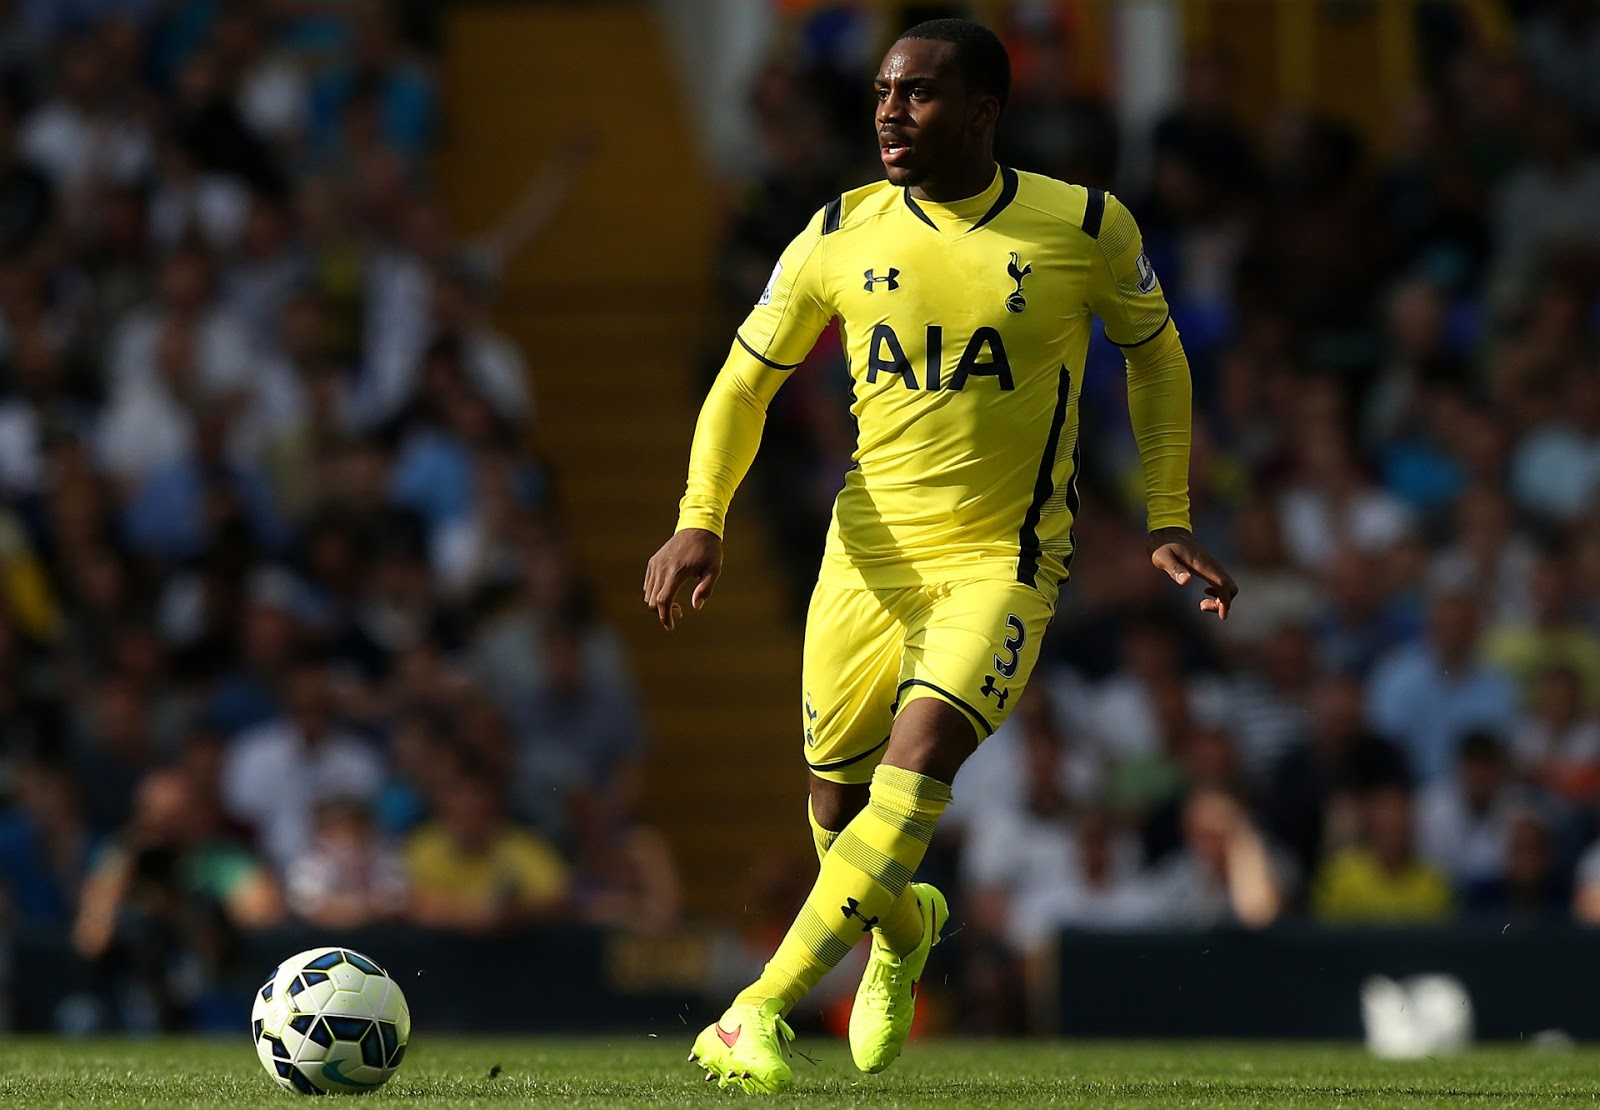 Elevado honor Doncella Here Are Our Top 5 Under Armour Tottenham Kits - Footy Headlines